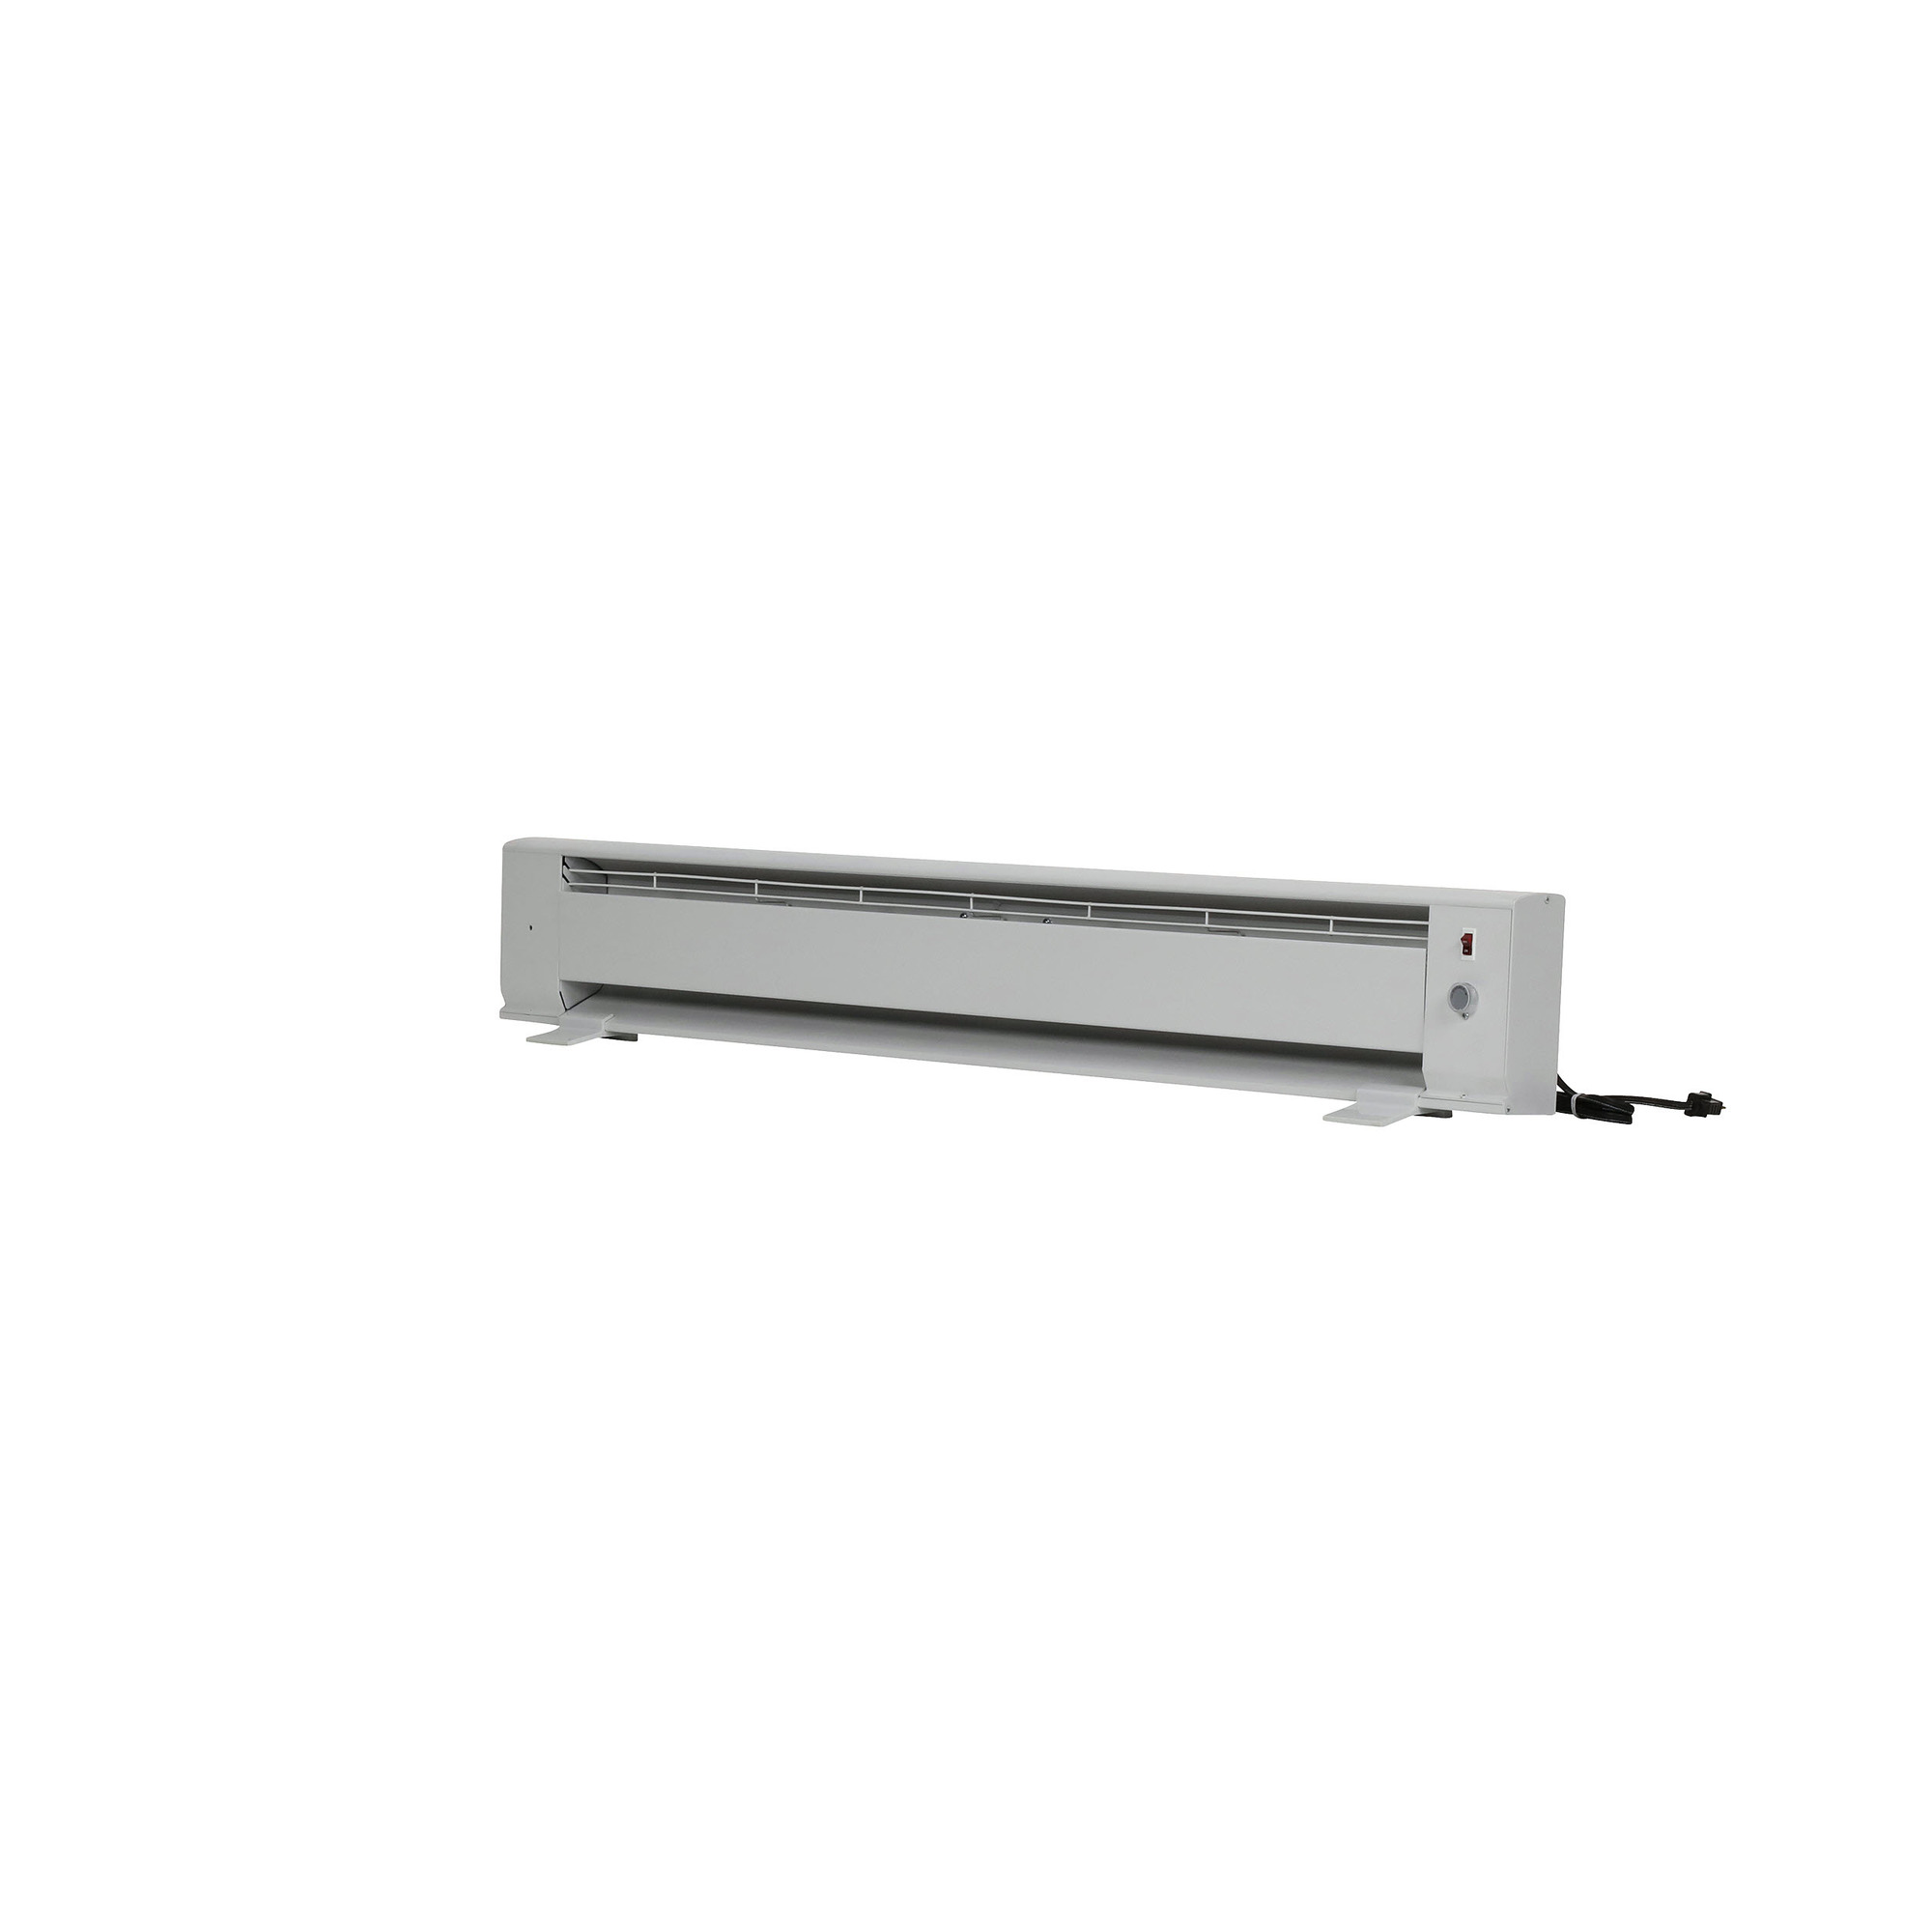 TPI Markel Portable Electric Hydronic Baseboard Heater, Heat Type Convection, Heat Output 5120 Btu/hour, Heating Capability 150 ftÂ², Model E3915-60P